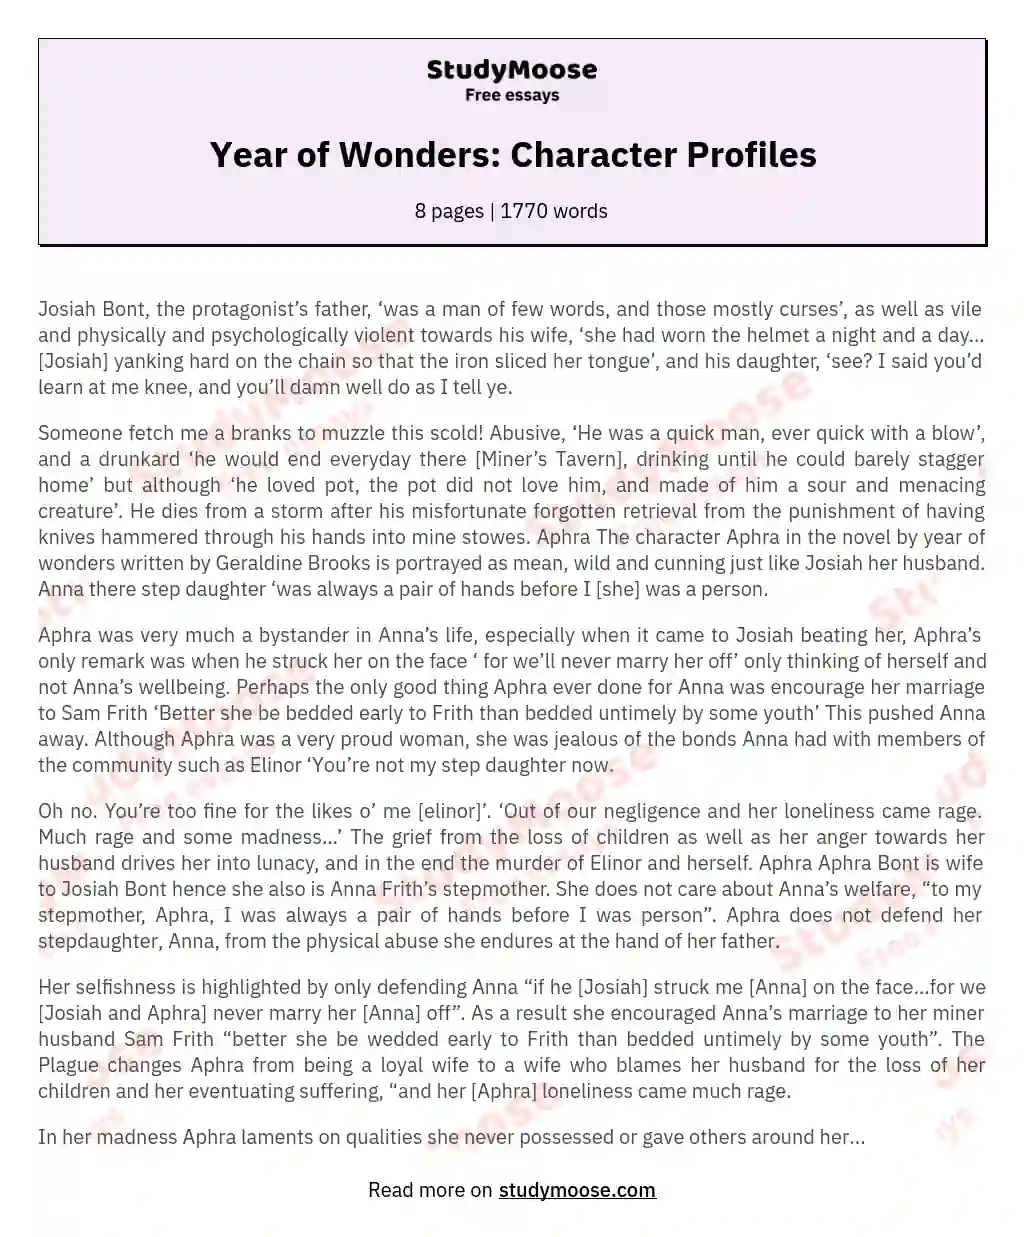 Year of Wonders: Character Profiles essay